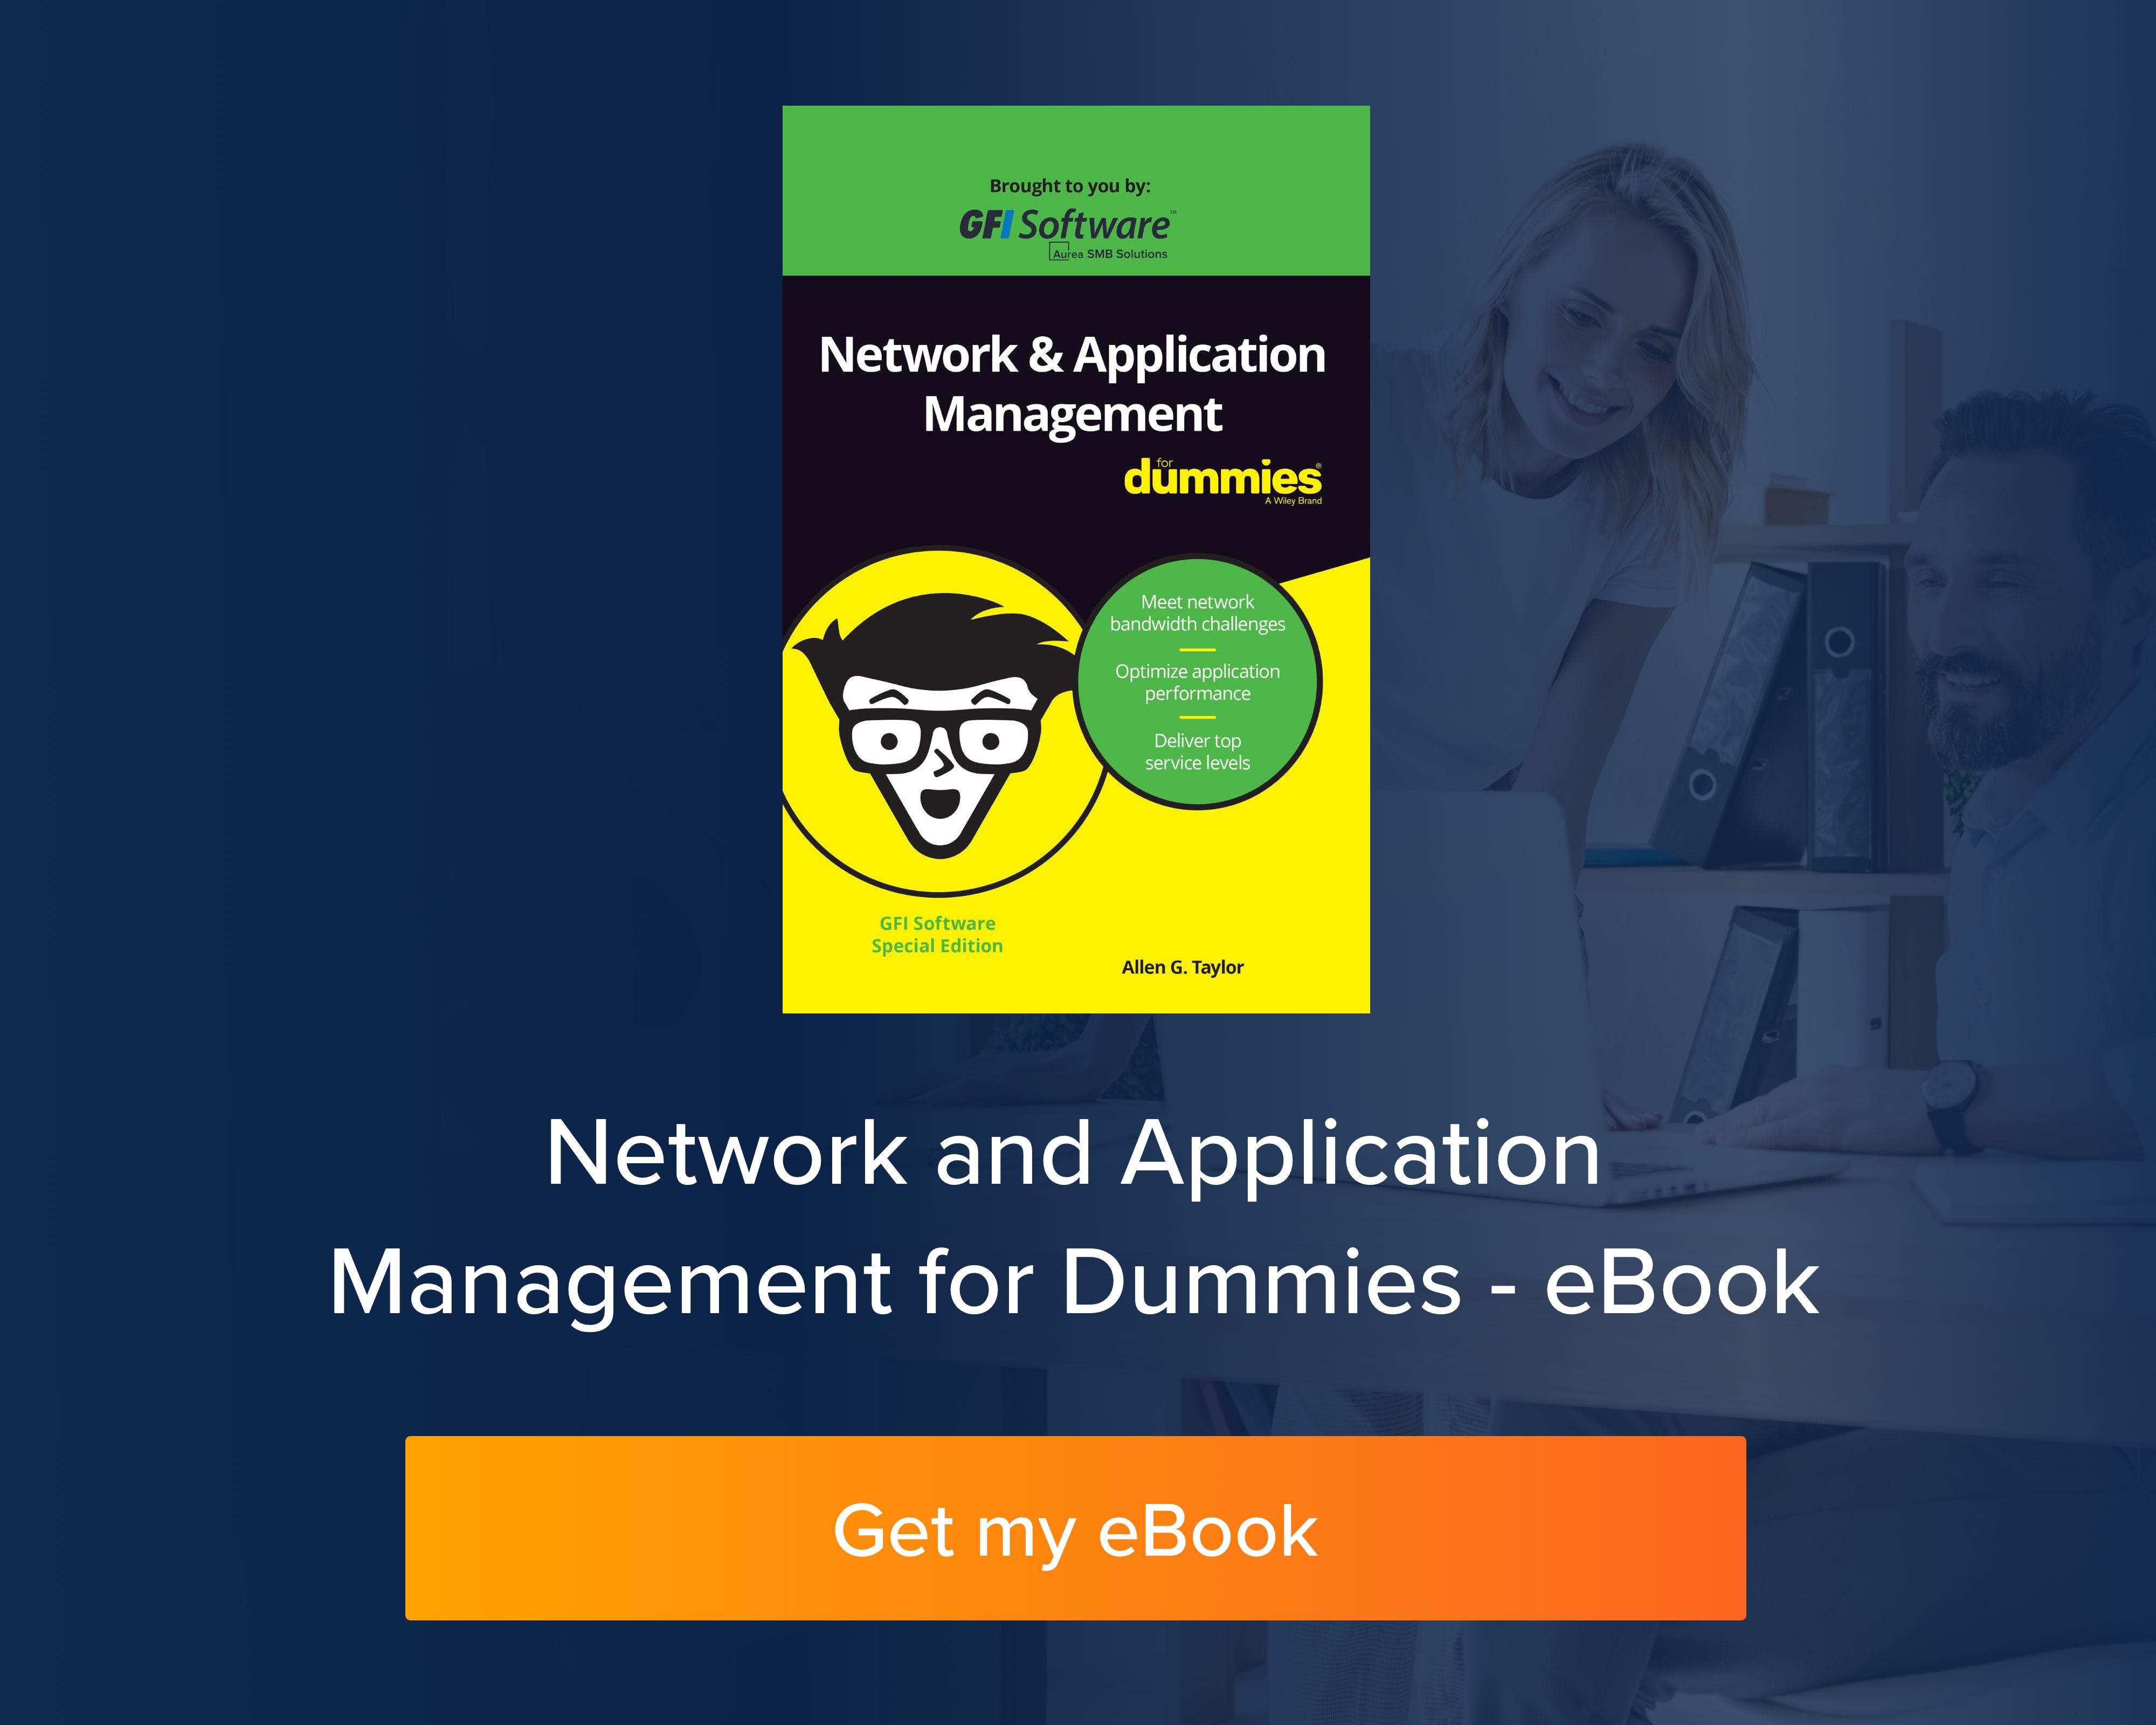 exinda Network and Application Management for Dummies - eBook